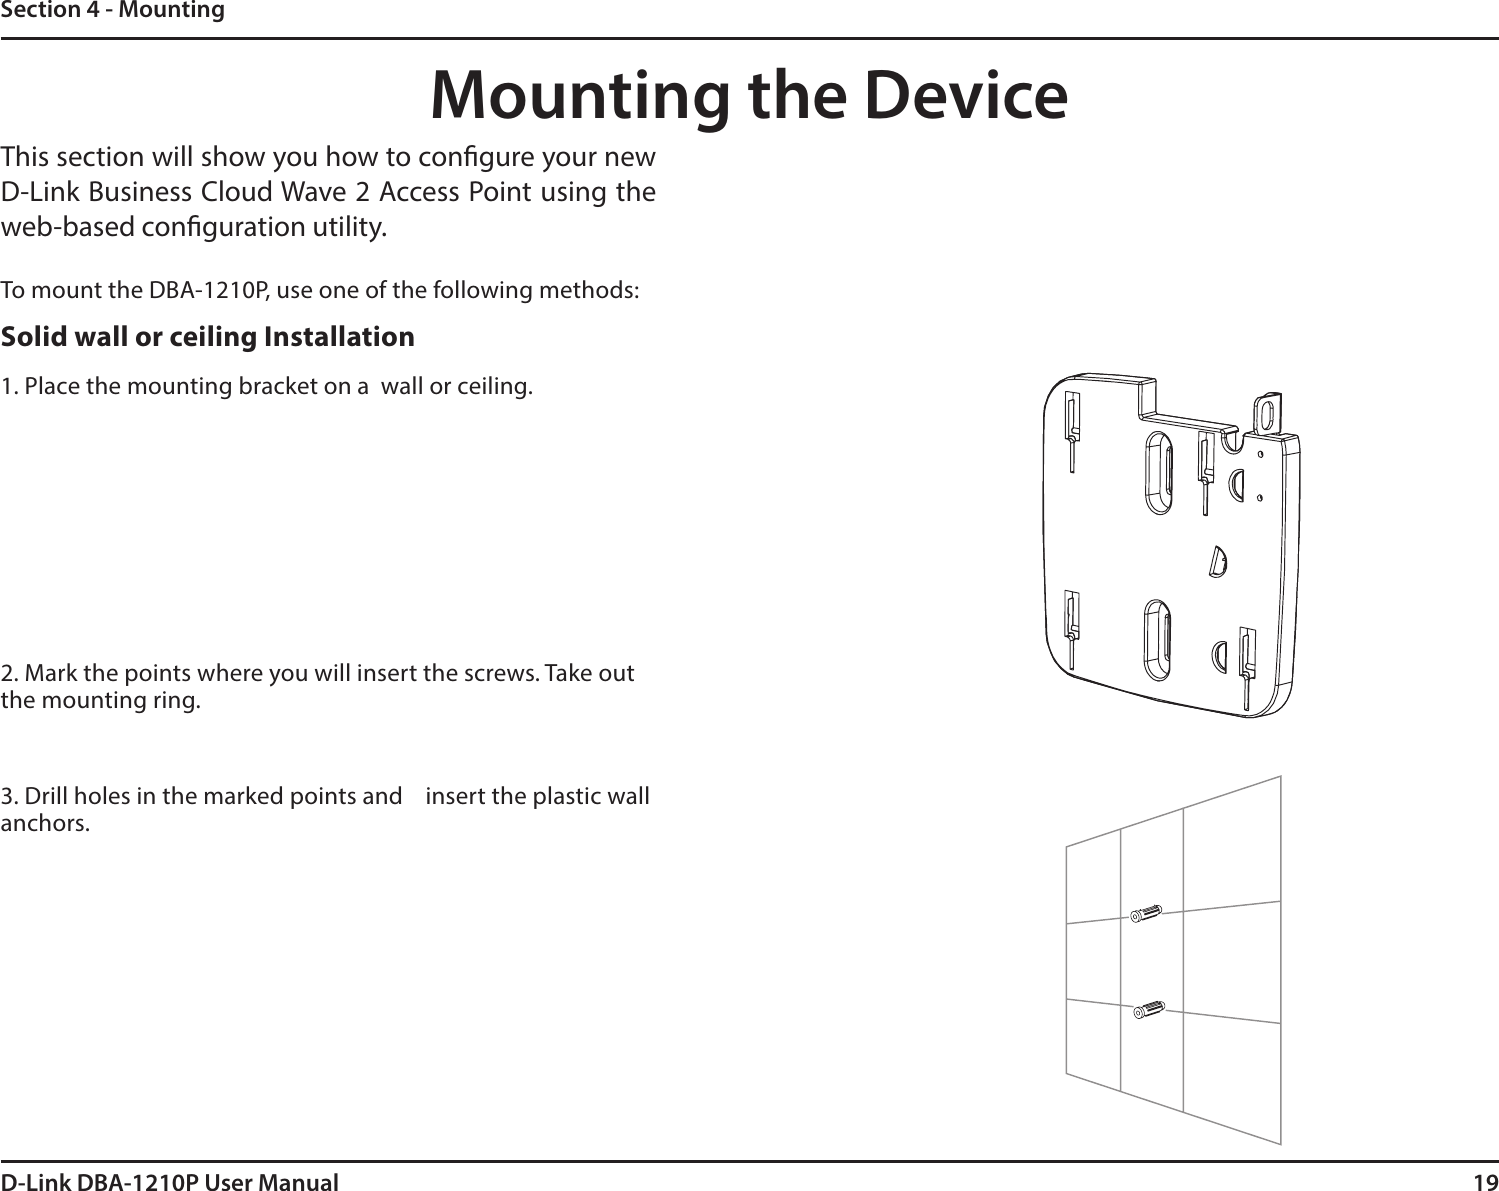 19D-Link DBA-1210P User ManualSection 4 - MountingMounting the DeviceThis section will show you how to congure your new D-Link Business Cloud Wave 2 Access Point using the web-based conguration utility.To mount the DBA-1210P, use one of the following methods:Solid wall or ceiling Installation1. Place the mounting bracket on a  wall or ceiling.2. Mark the points where you will insert the screws. Take out the mounting ring.3. Drill holes in the marked points and    insert the plastic wall anchors.